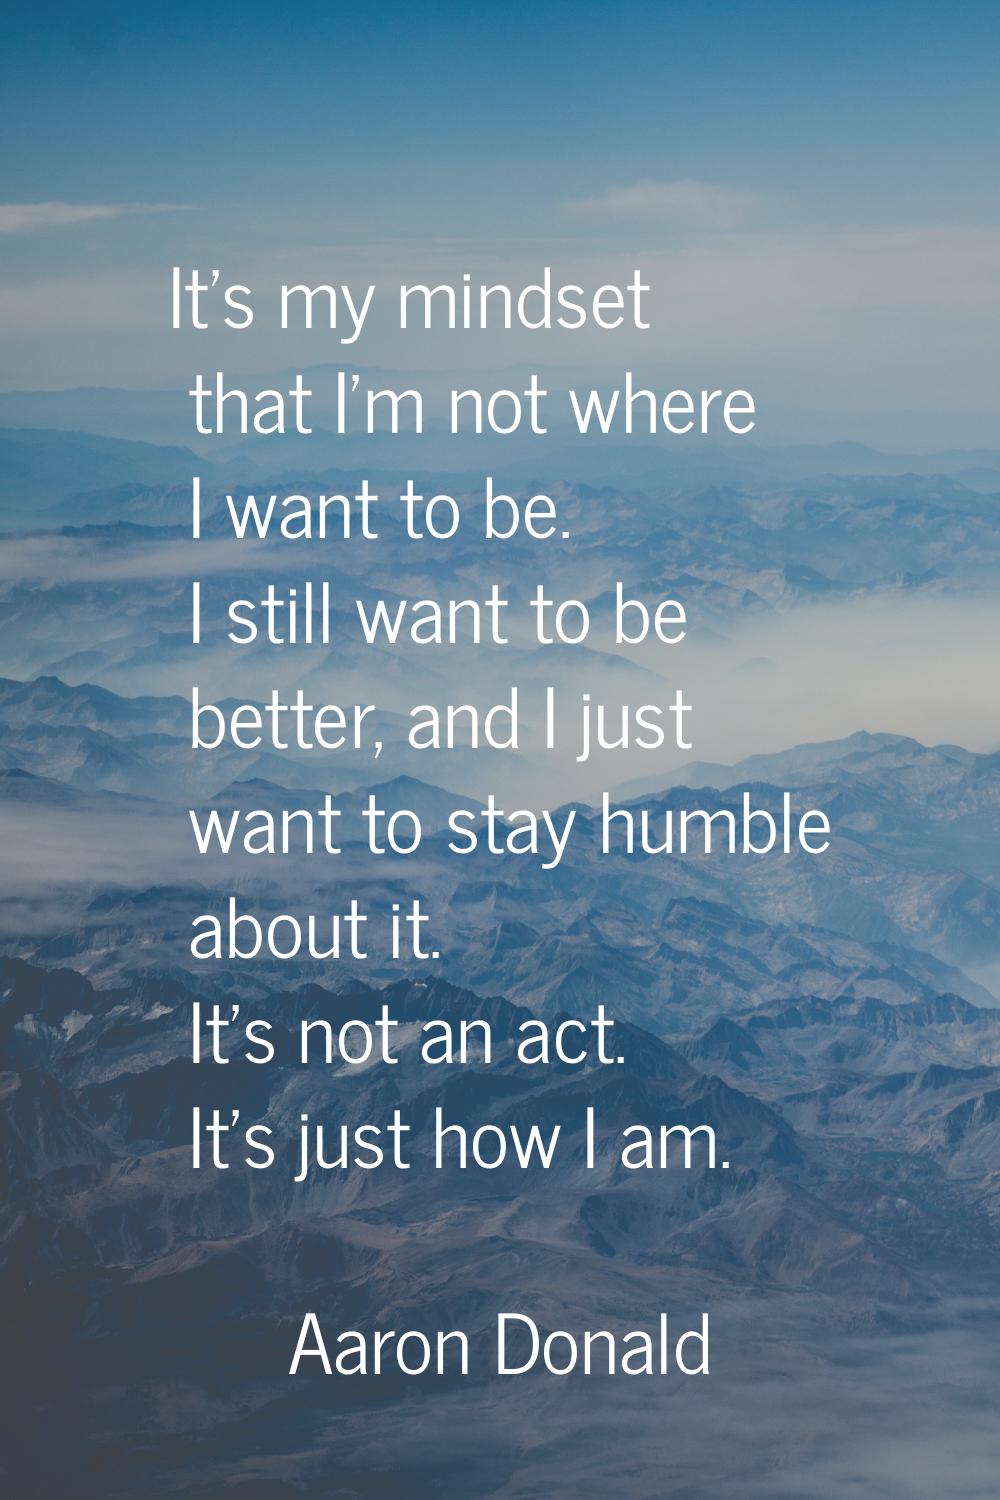 It's my mindset that I'm not where I want to be. I still want to be better, and I just want to stay